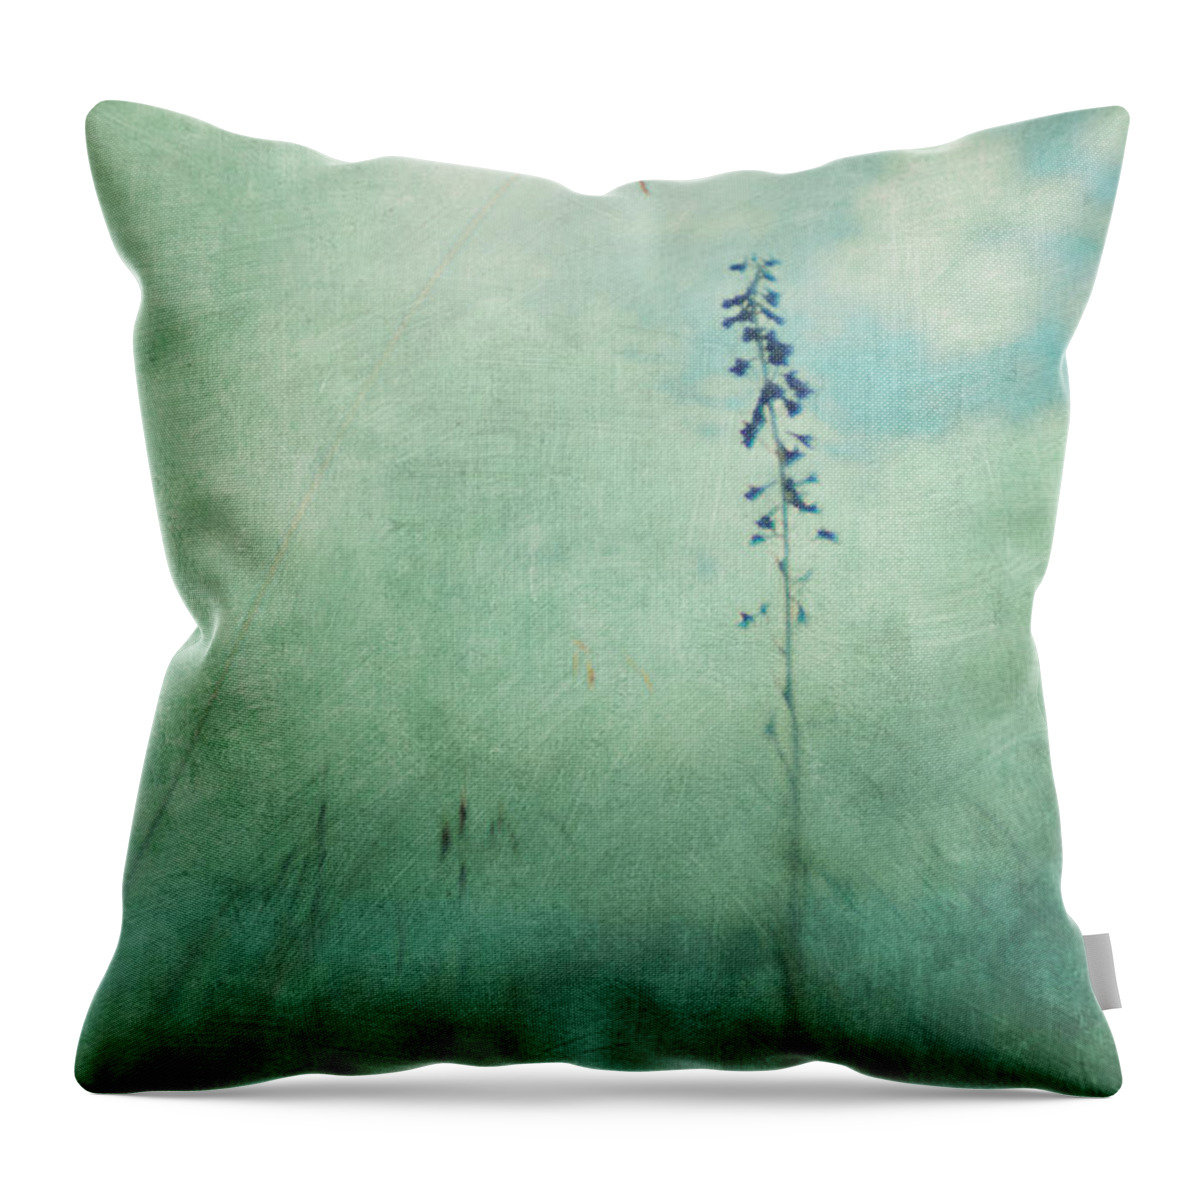 Flowers Throw Pillow featuring the photograph Summer Meadow Poem 1 by Priska Wettstein